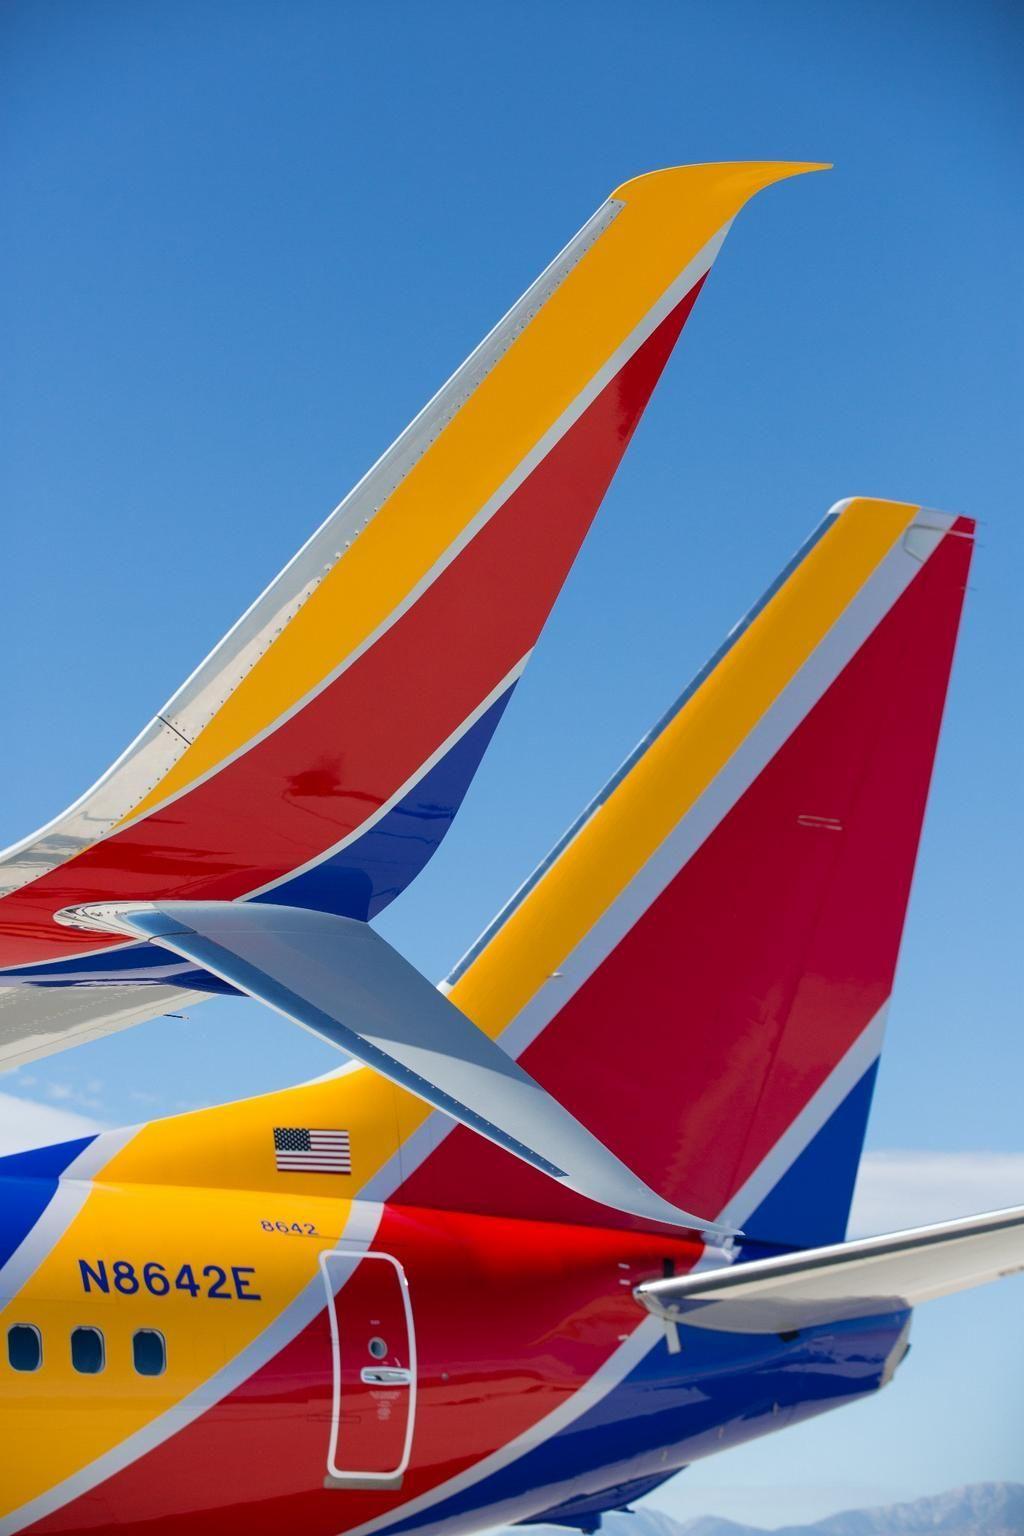 Blue and Red Airline Logo - Blue, Red & Yellow | Blue, Red & Yellow | Southwest airlines ...